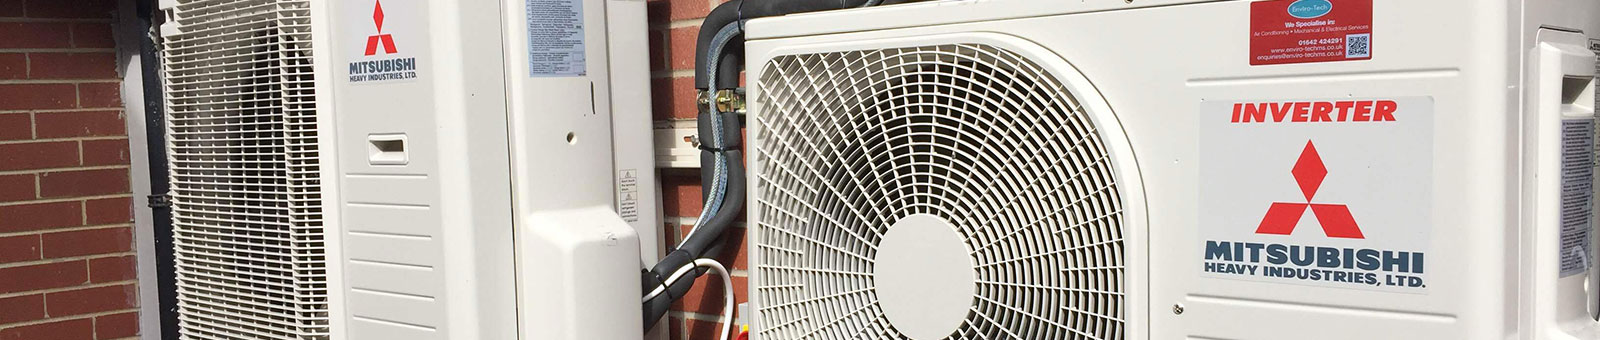 Air Conditioning Services and Support